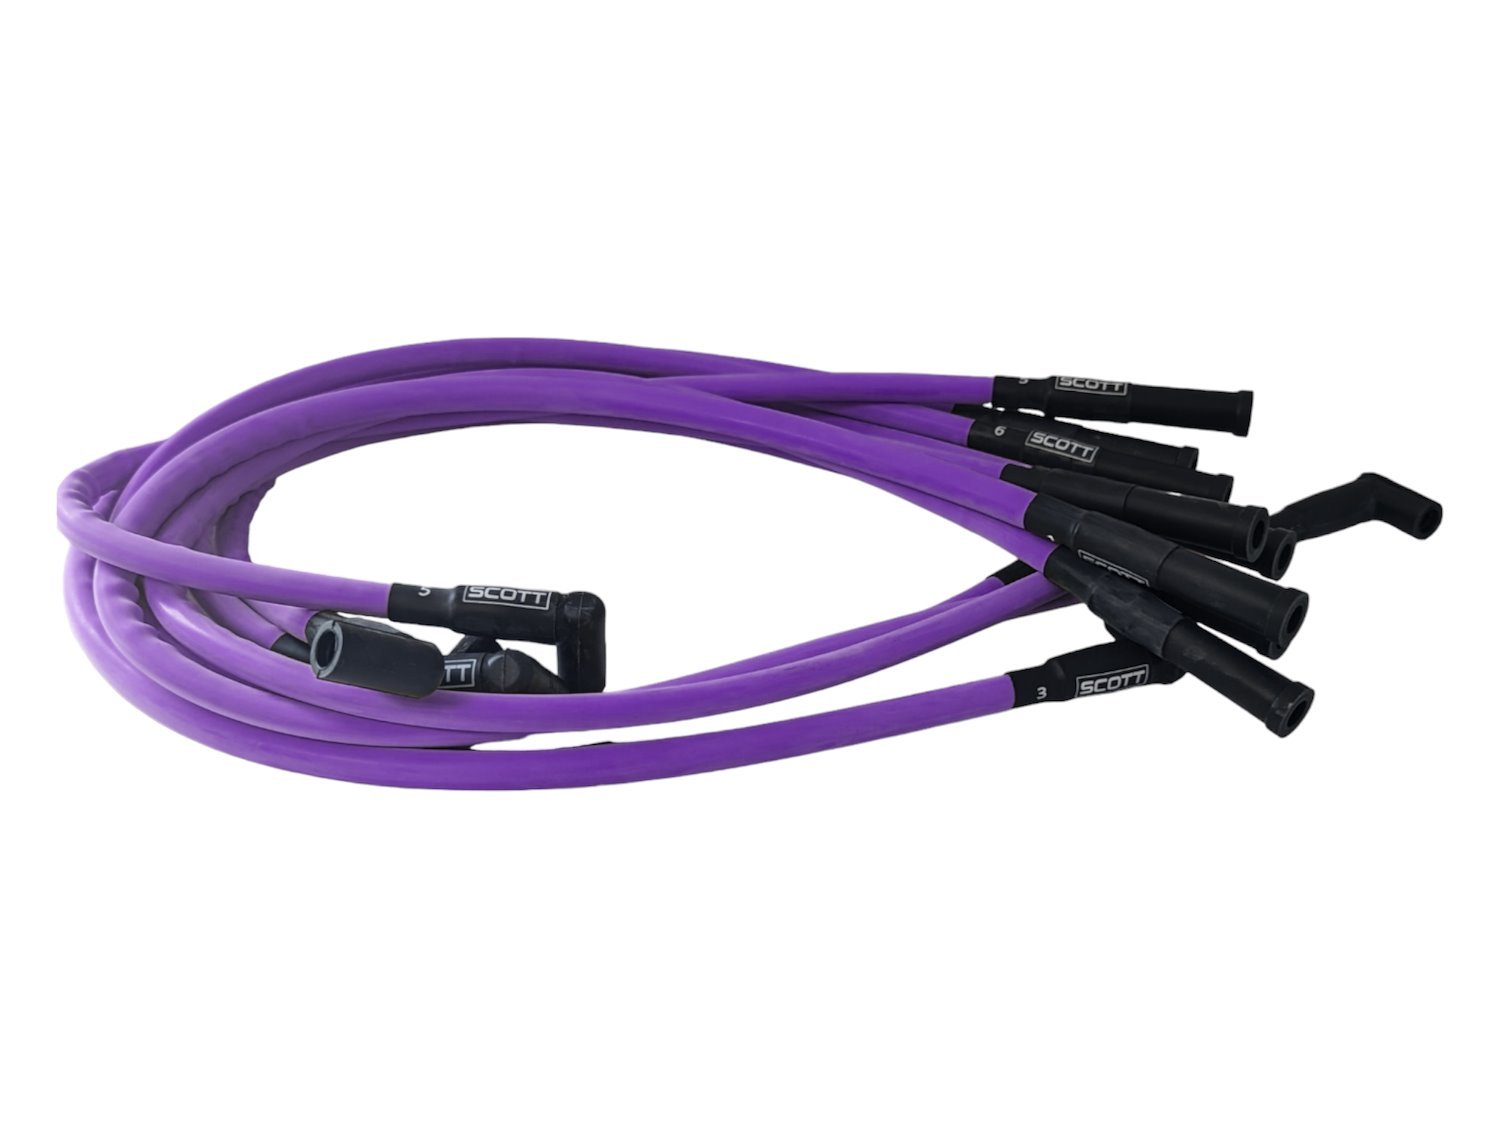 SPW-CH-421-6 High-Performance Silicone-Sleeved Spark Plug Wire Set for Small Block Chevy, Over Valve Cover [Purple]